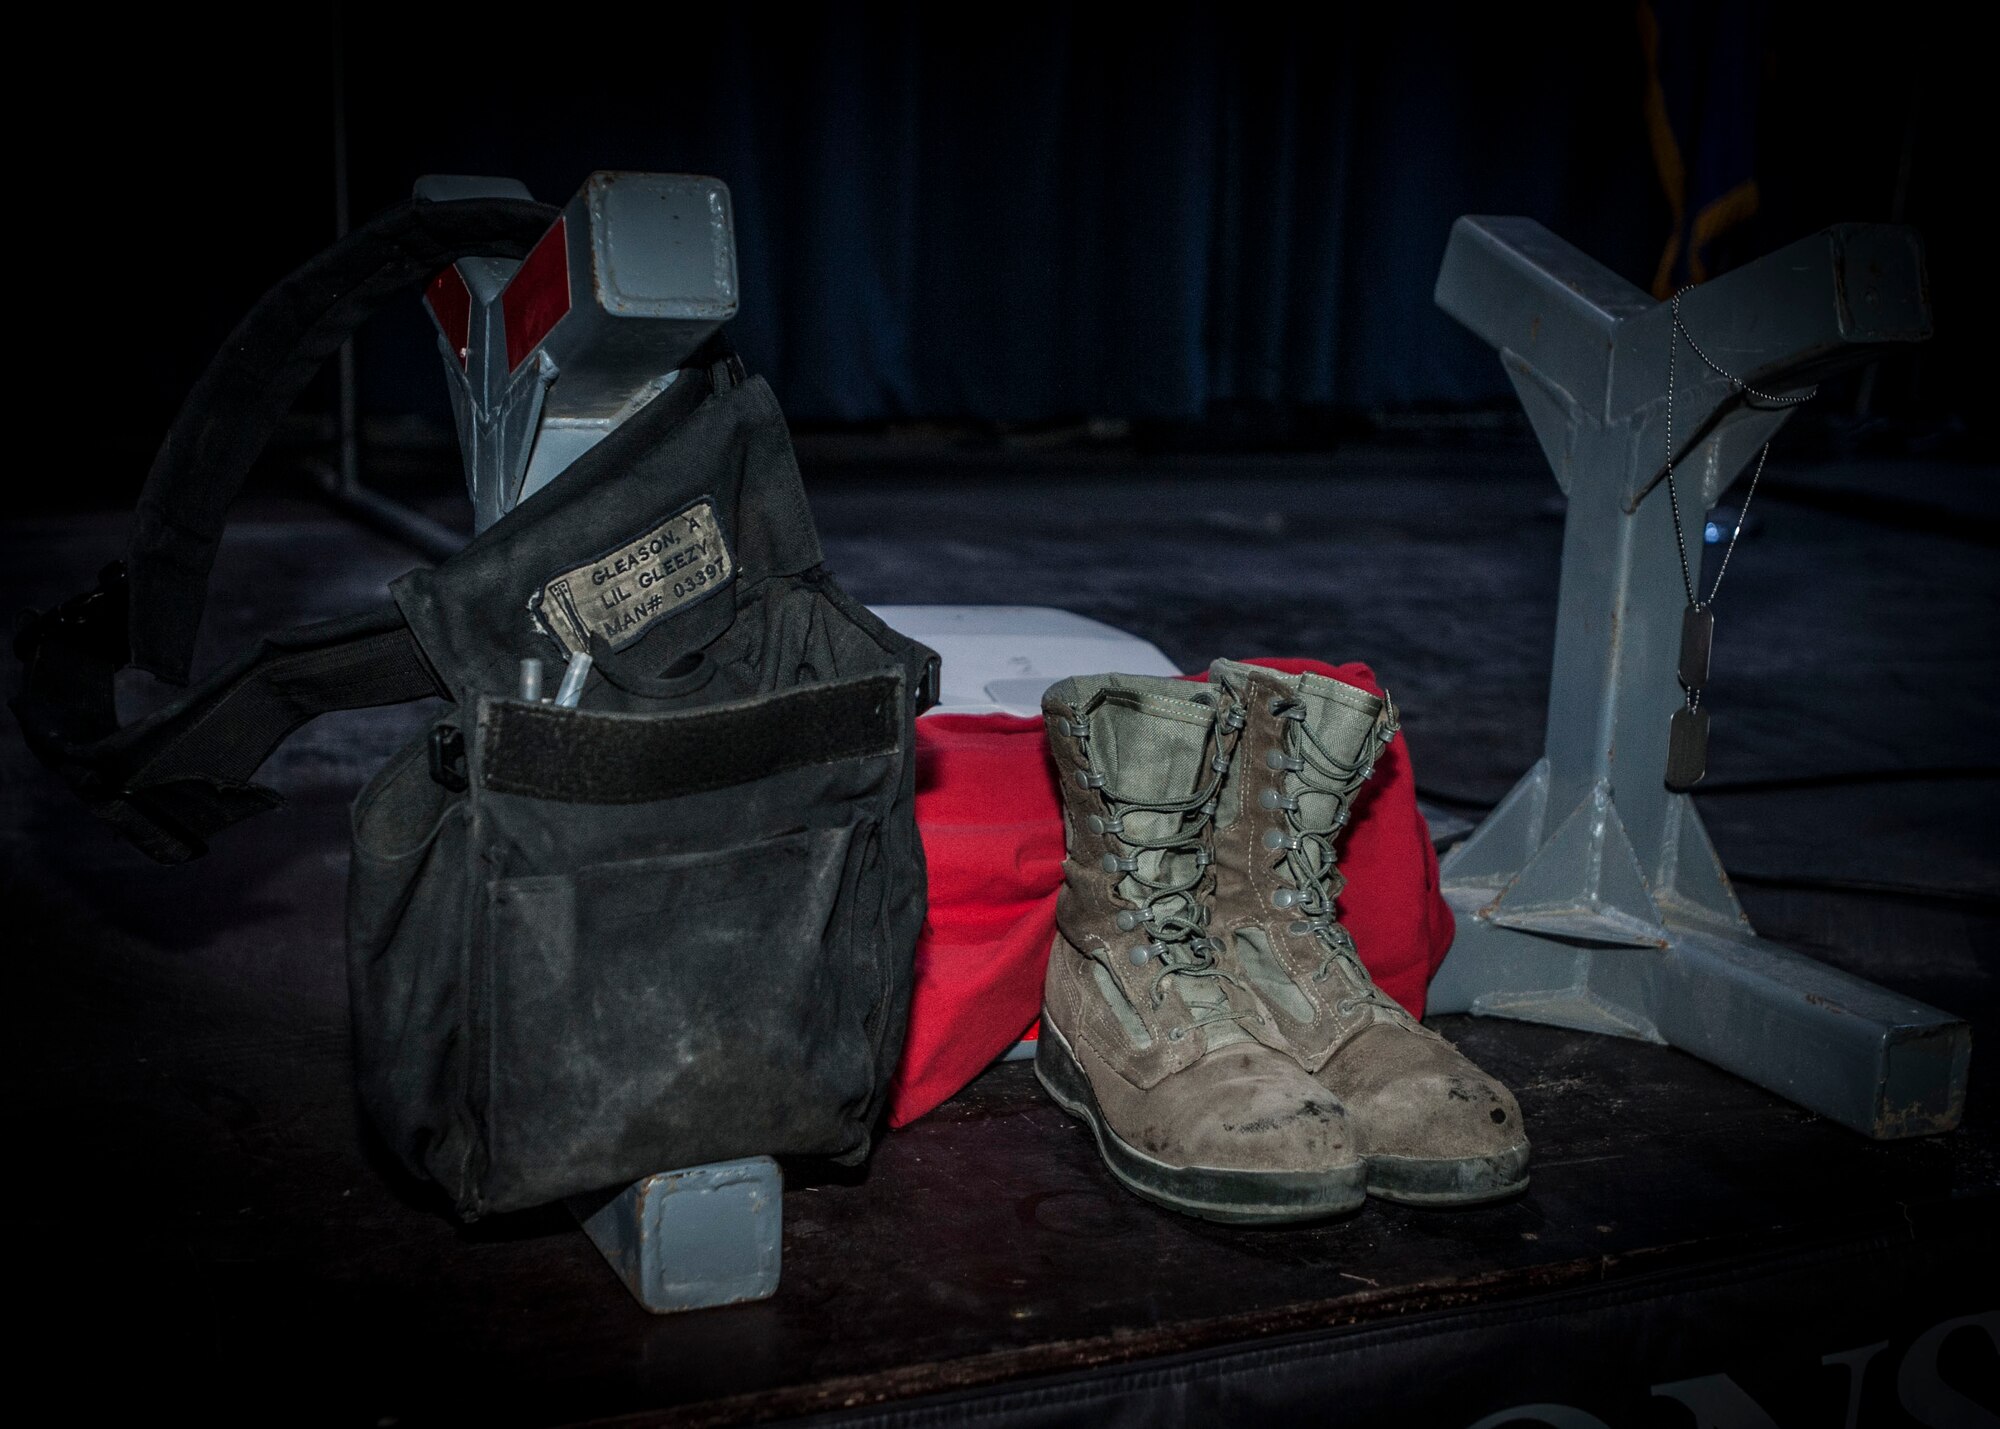 A munitions Y stand containing the weapons pouch, boots, and dog tags of Staff Sgt. Alexandria Morrow, 332nd Expeditionary Maintenance Squadron weapons load crew member, is displayed during a fallen warrior memorial ceremony Mar. 23, 2017, in Southwest Asia. Morrow died from injuries sustained while performing work duties in support of Operation Inherent Resolve. (U.S. Air Force photo by Staff Sgt. Eboni Reams)